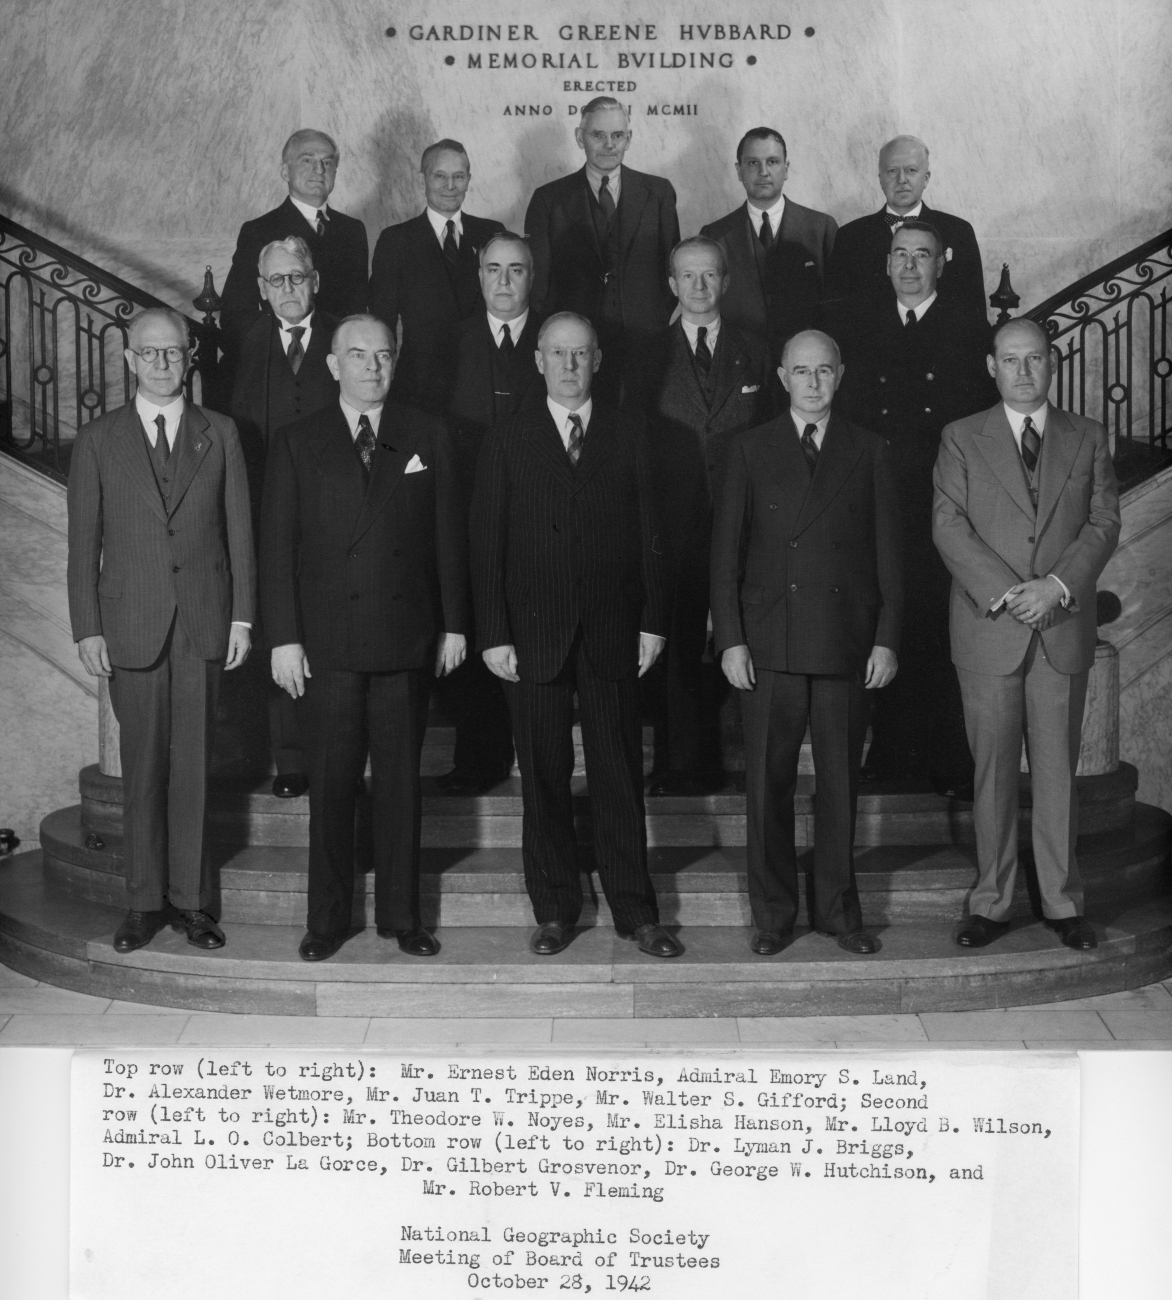 Board of Trustees of the National Geographic Society